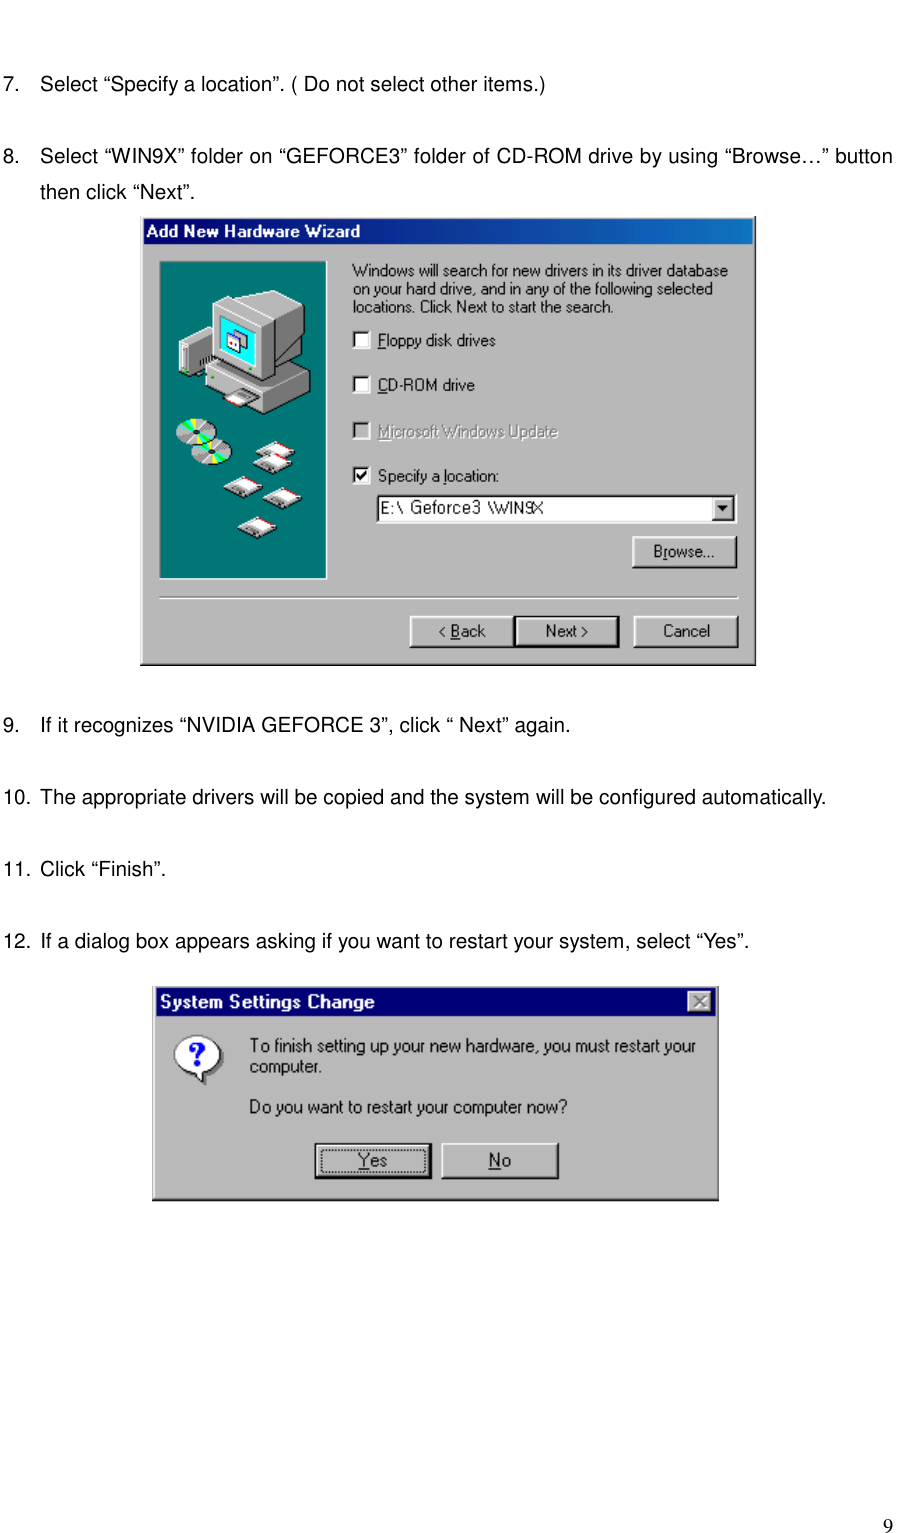     9  7.  Select “Specify a location”. ( Do not select other items.)  8.  Select “WIN9X” folder on “GEFORCE3” folder of CD-ROM drive by using “Browse…” button then click “Next”.   9.  If it recognizes “NVIDIA GEFORCE 3”, click “ Next” again.  10. The appropriate drivers will be copied and the system will be configured automatically.  11. Click “Finish”.  12. If a dialog box appears asking if you want to restart your system, select “Yes”.  